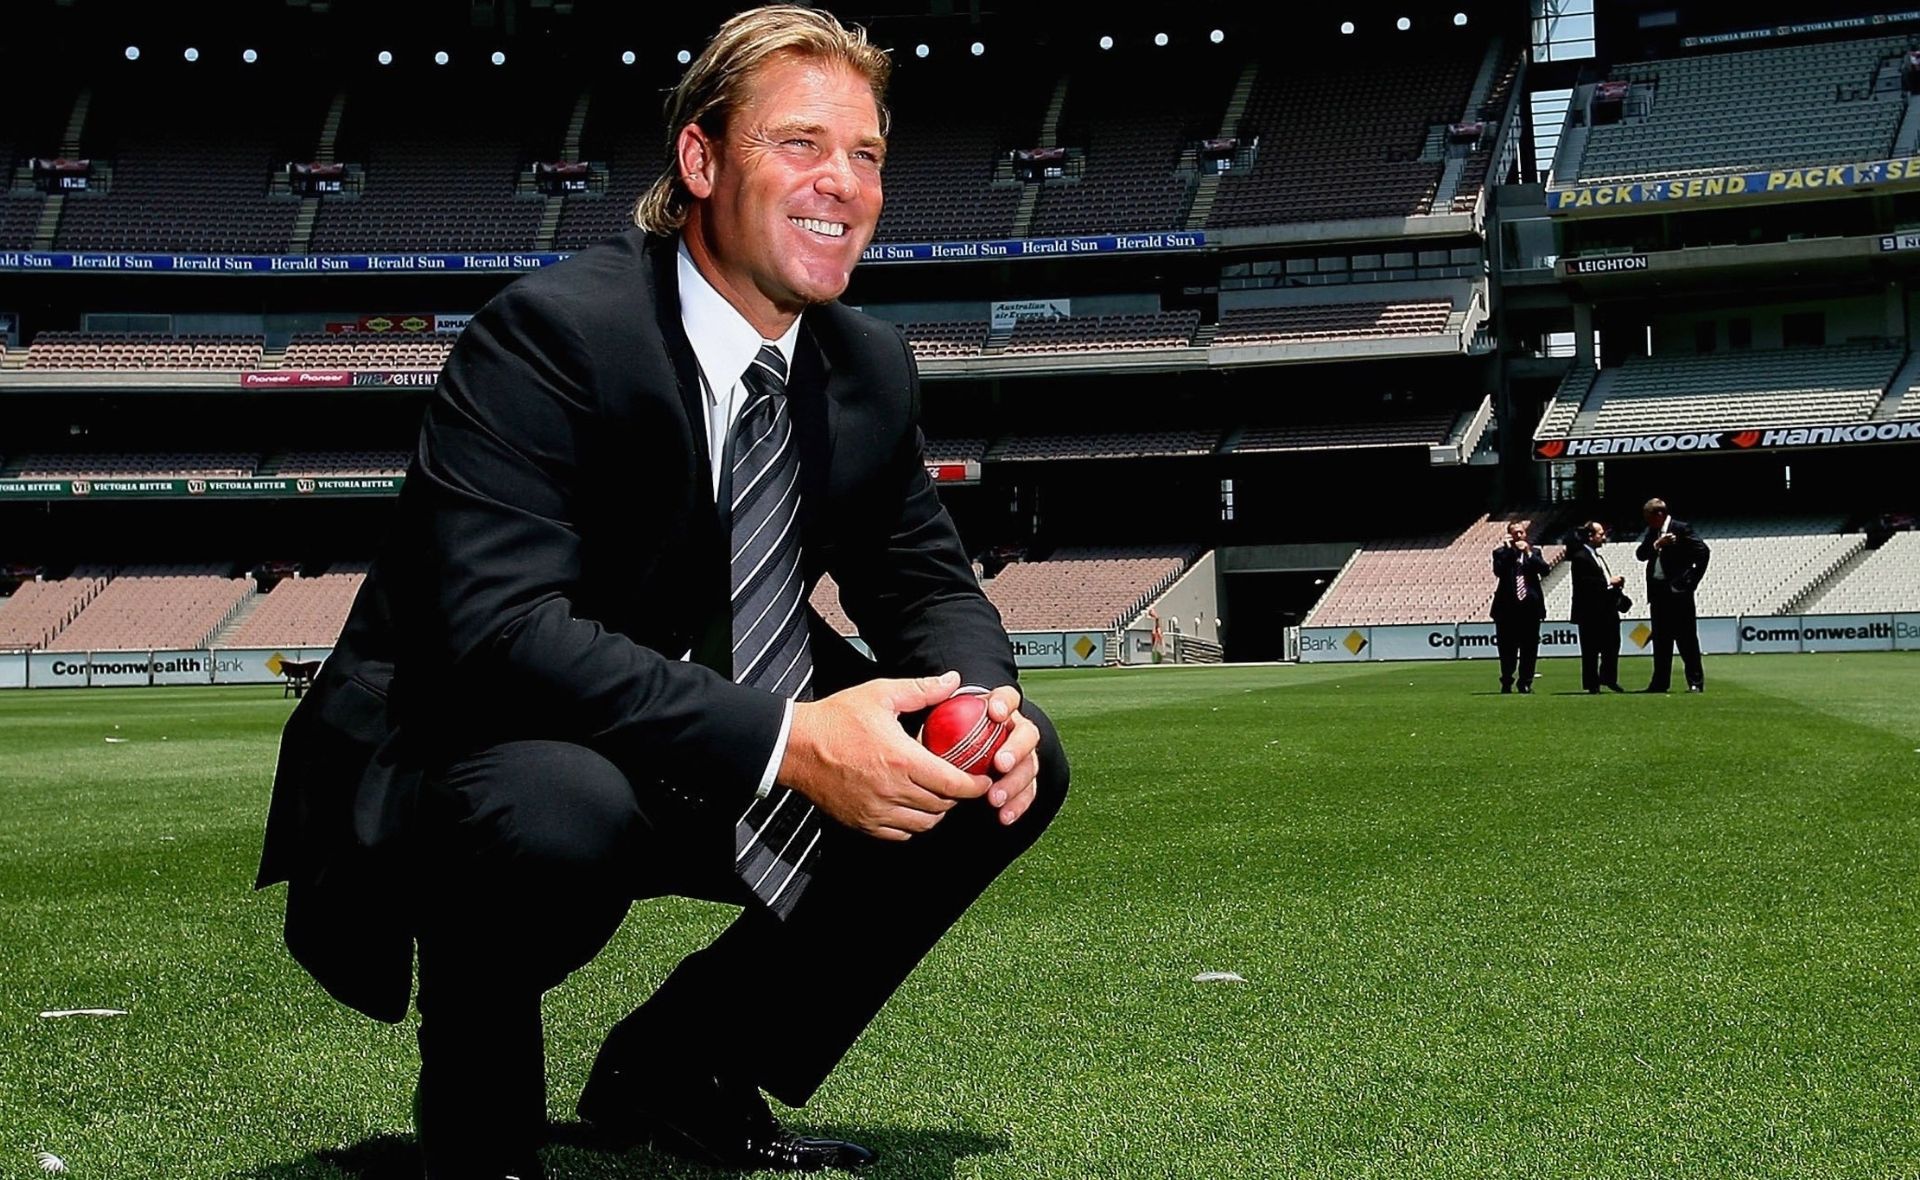 Shane Warne is famous for his cricket achievements, but in his later years, he championed a cause that may save men around the world